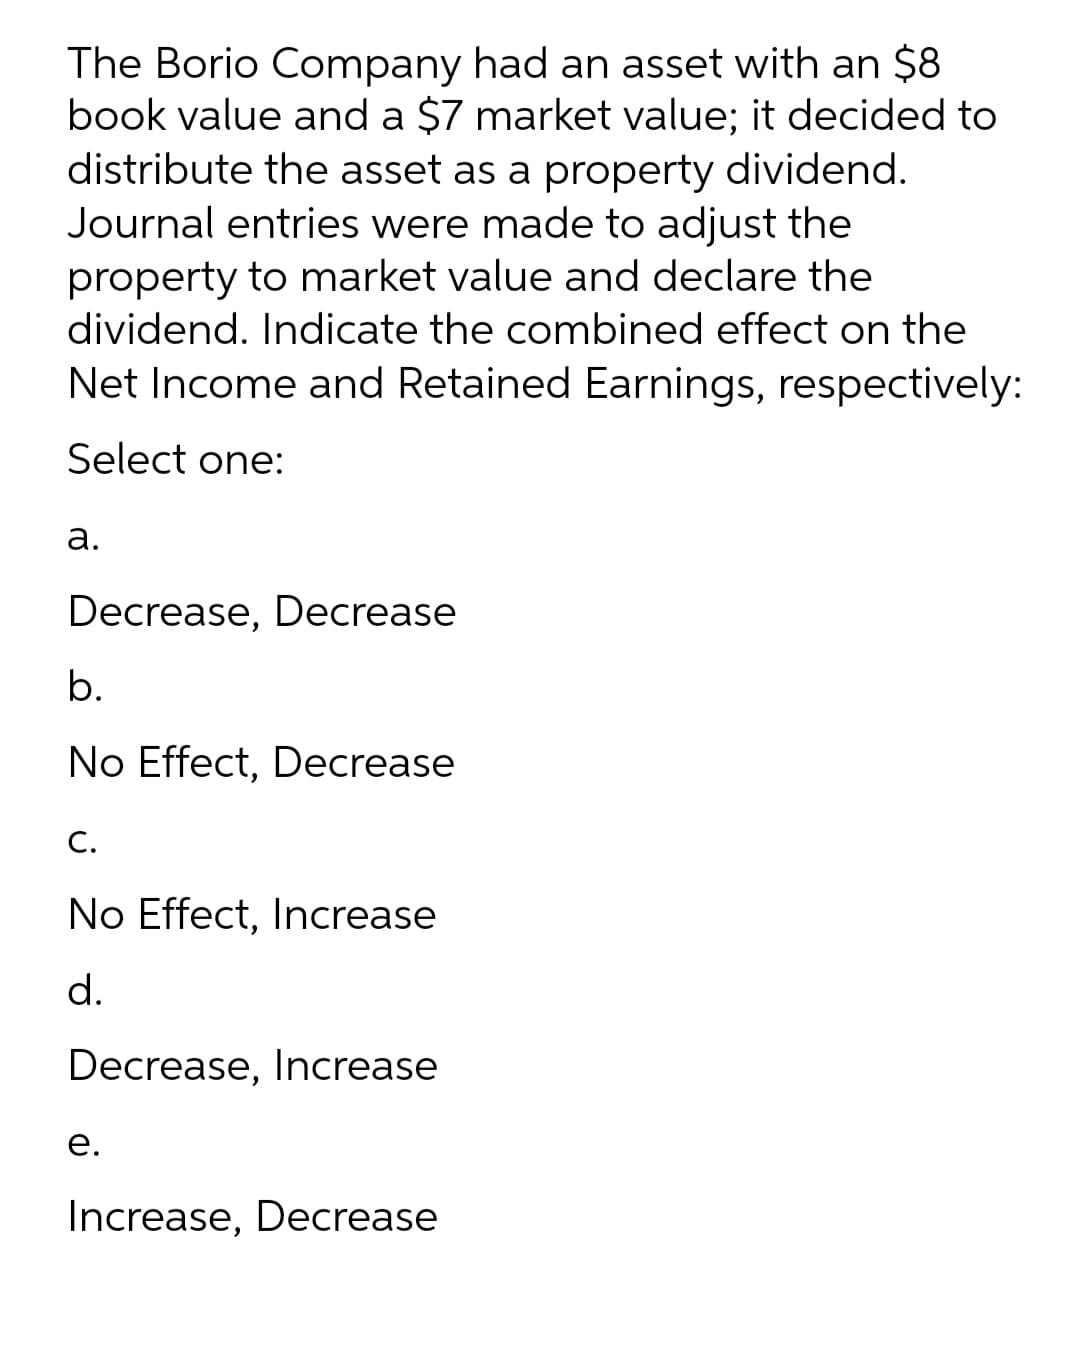 The Borio Company had an asset with an $8
book value and a $7 market value; it decided to
distribute the asset as a property dividend.
Journal entries were made to adjust the
property to market value and declare the
dividend. Indicate the combined effect on the
Net Income and Retained Earnings, respectively:
Select one:
а.
Decrease, Decrease
b.
No Effect, Decrease
С.
No Effect, Increase
d.
Decrease, Increase
е.
Increase, Decrease
